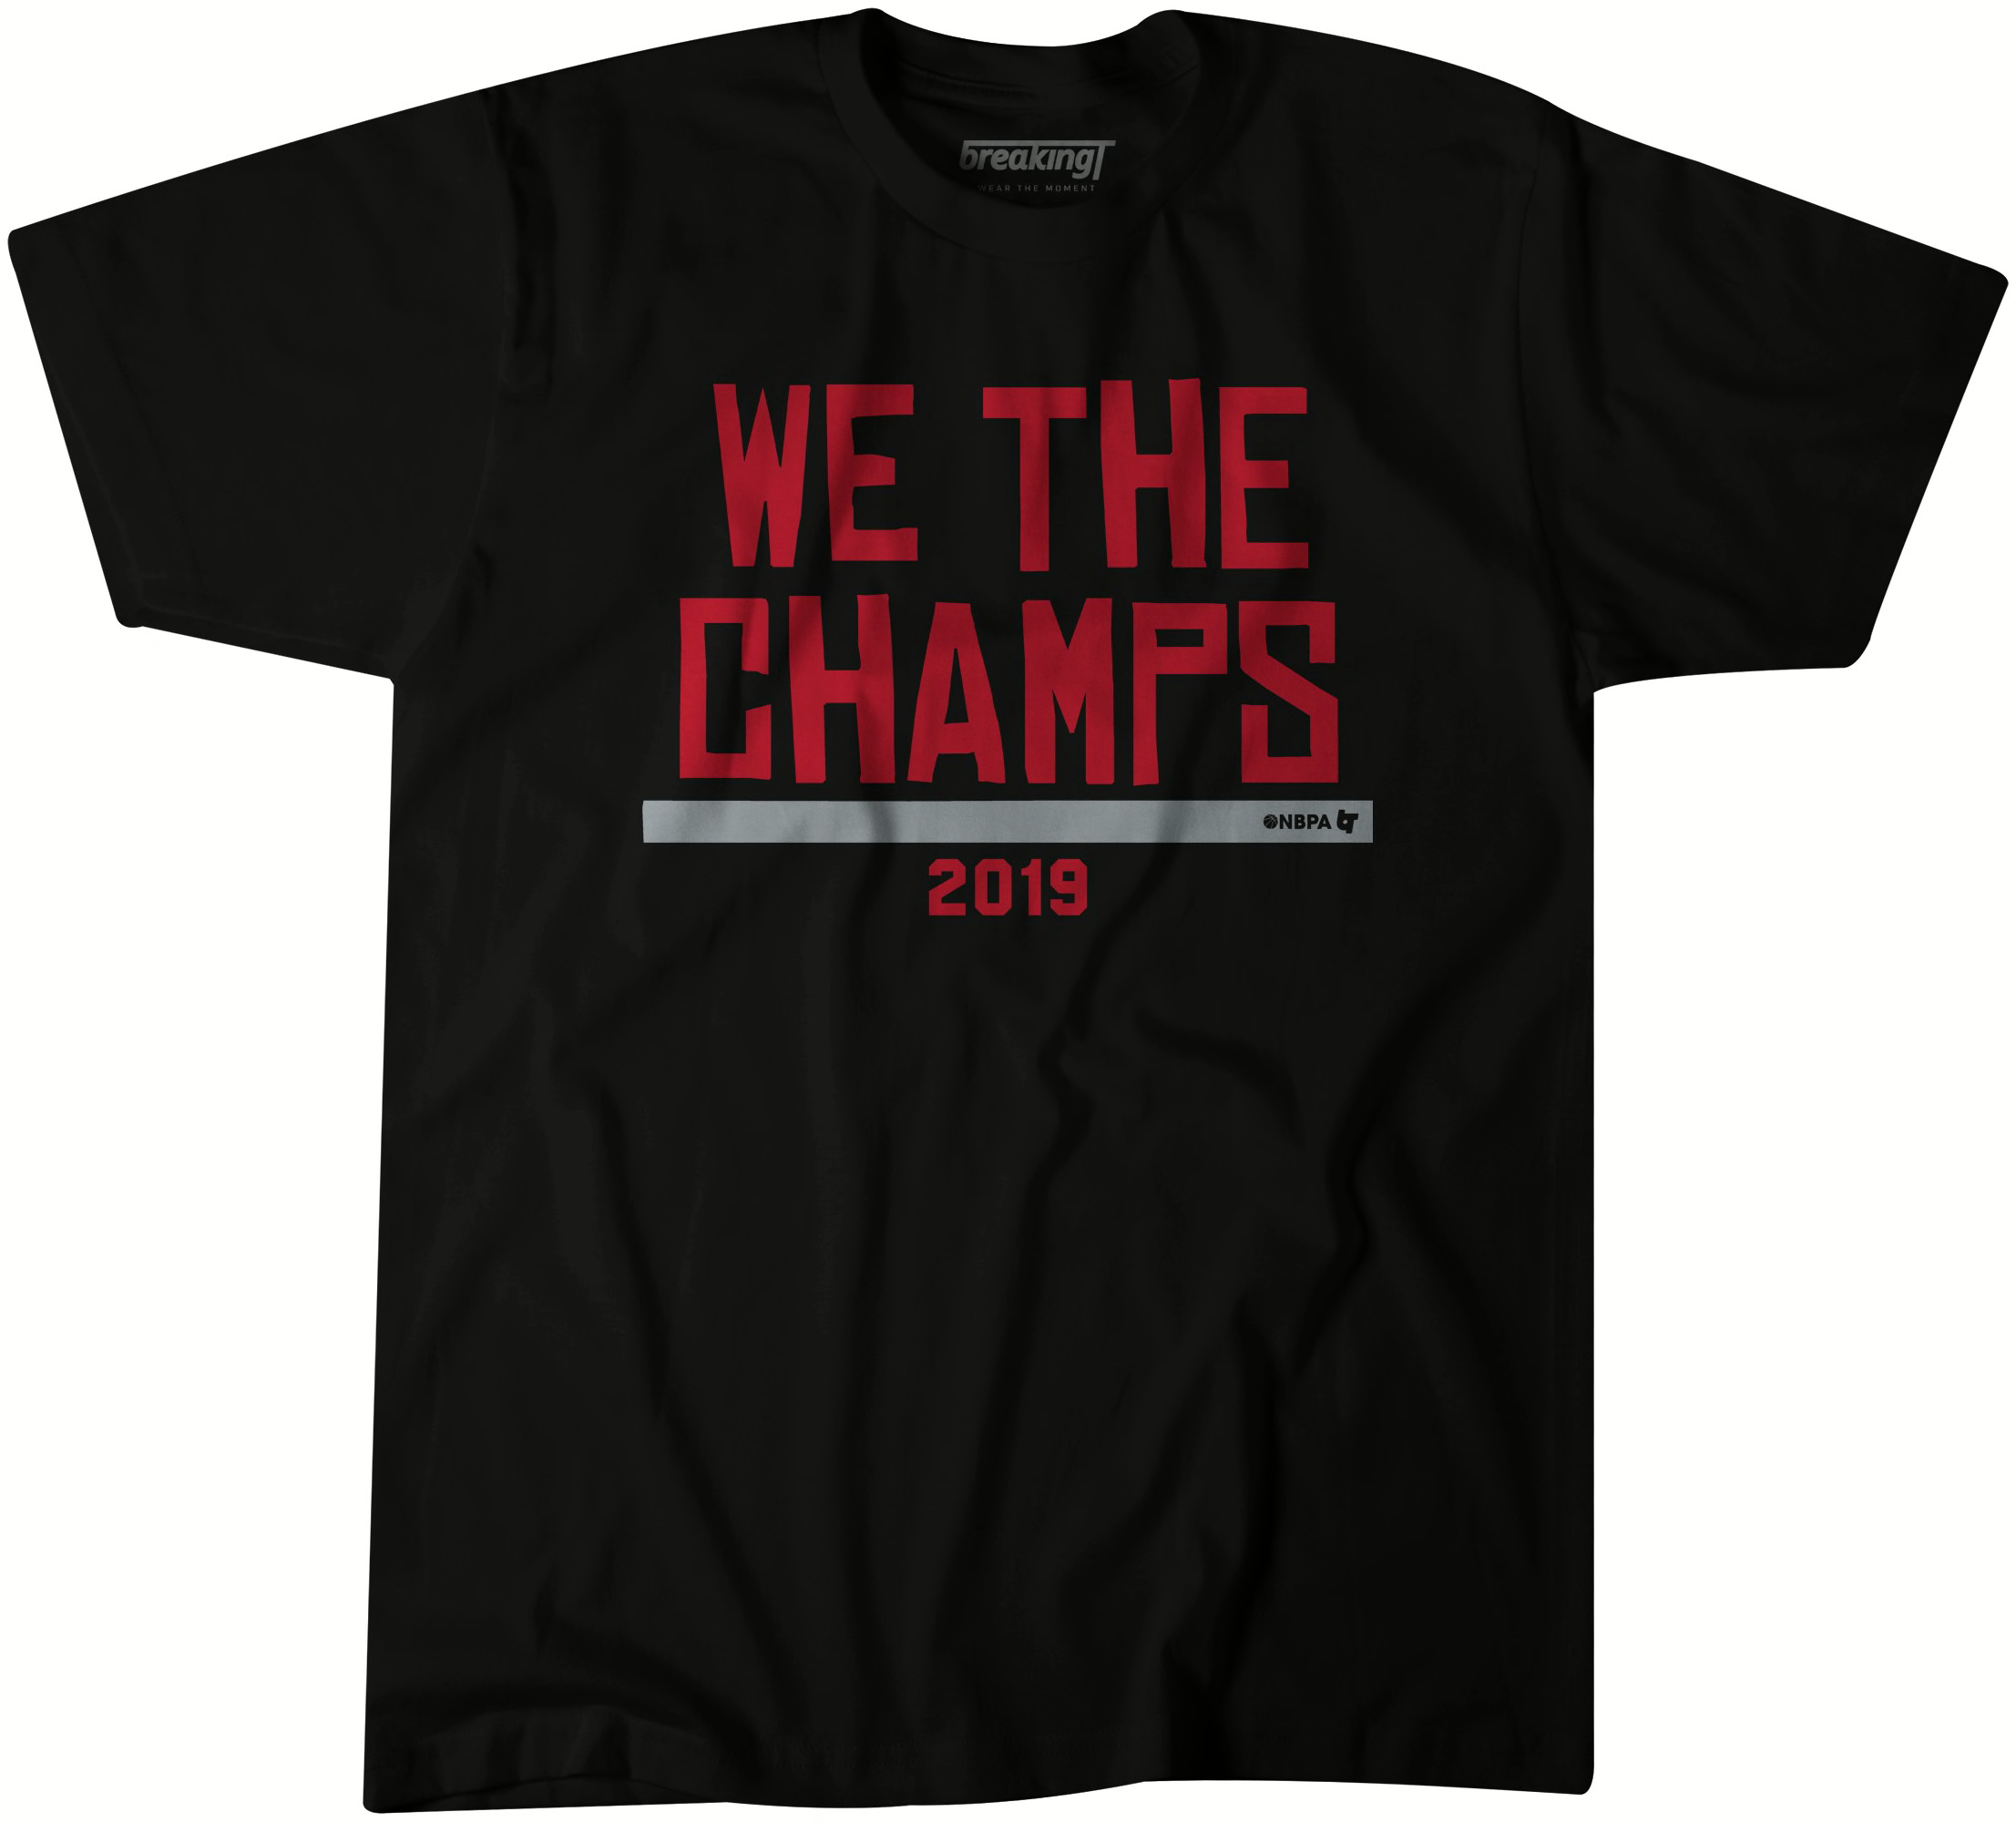 The Toronto Raptors have won the NBA Finals. Time to gear up.